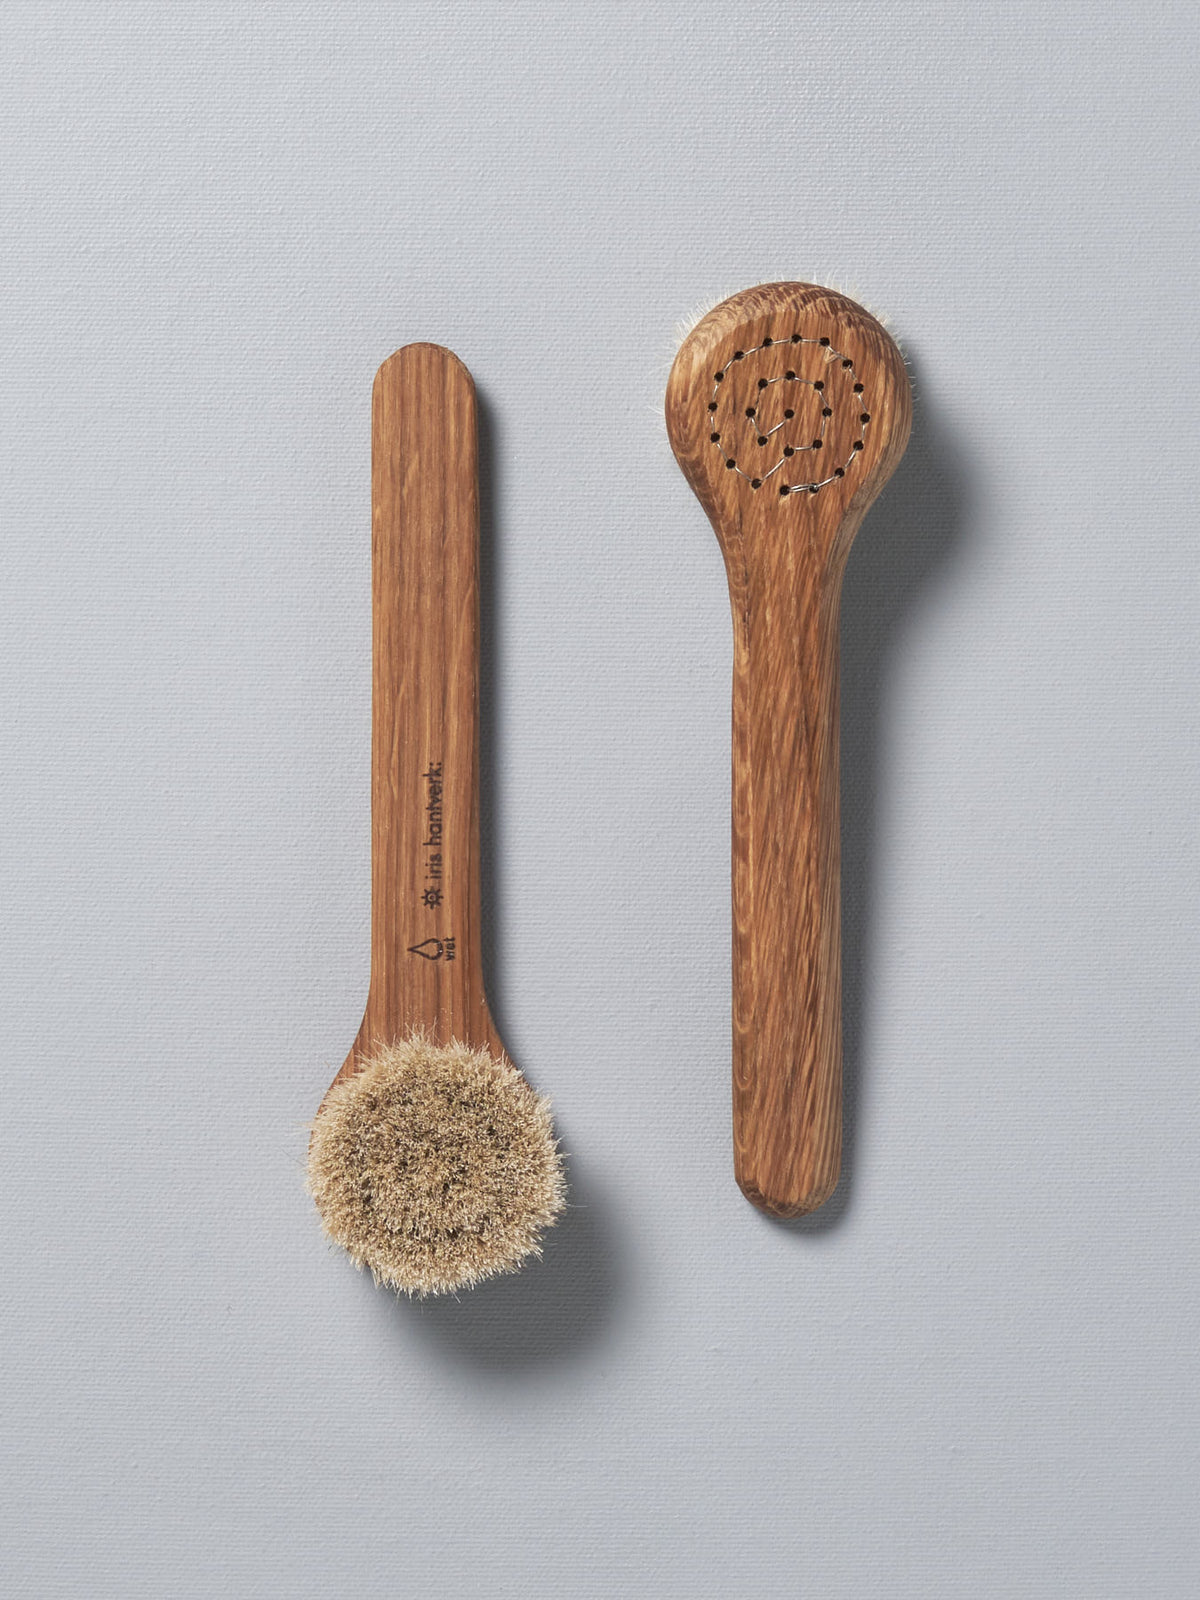 Two Iris Hantverk Face Brushes - Wet next to each other on a white surface.